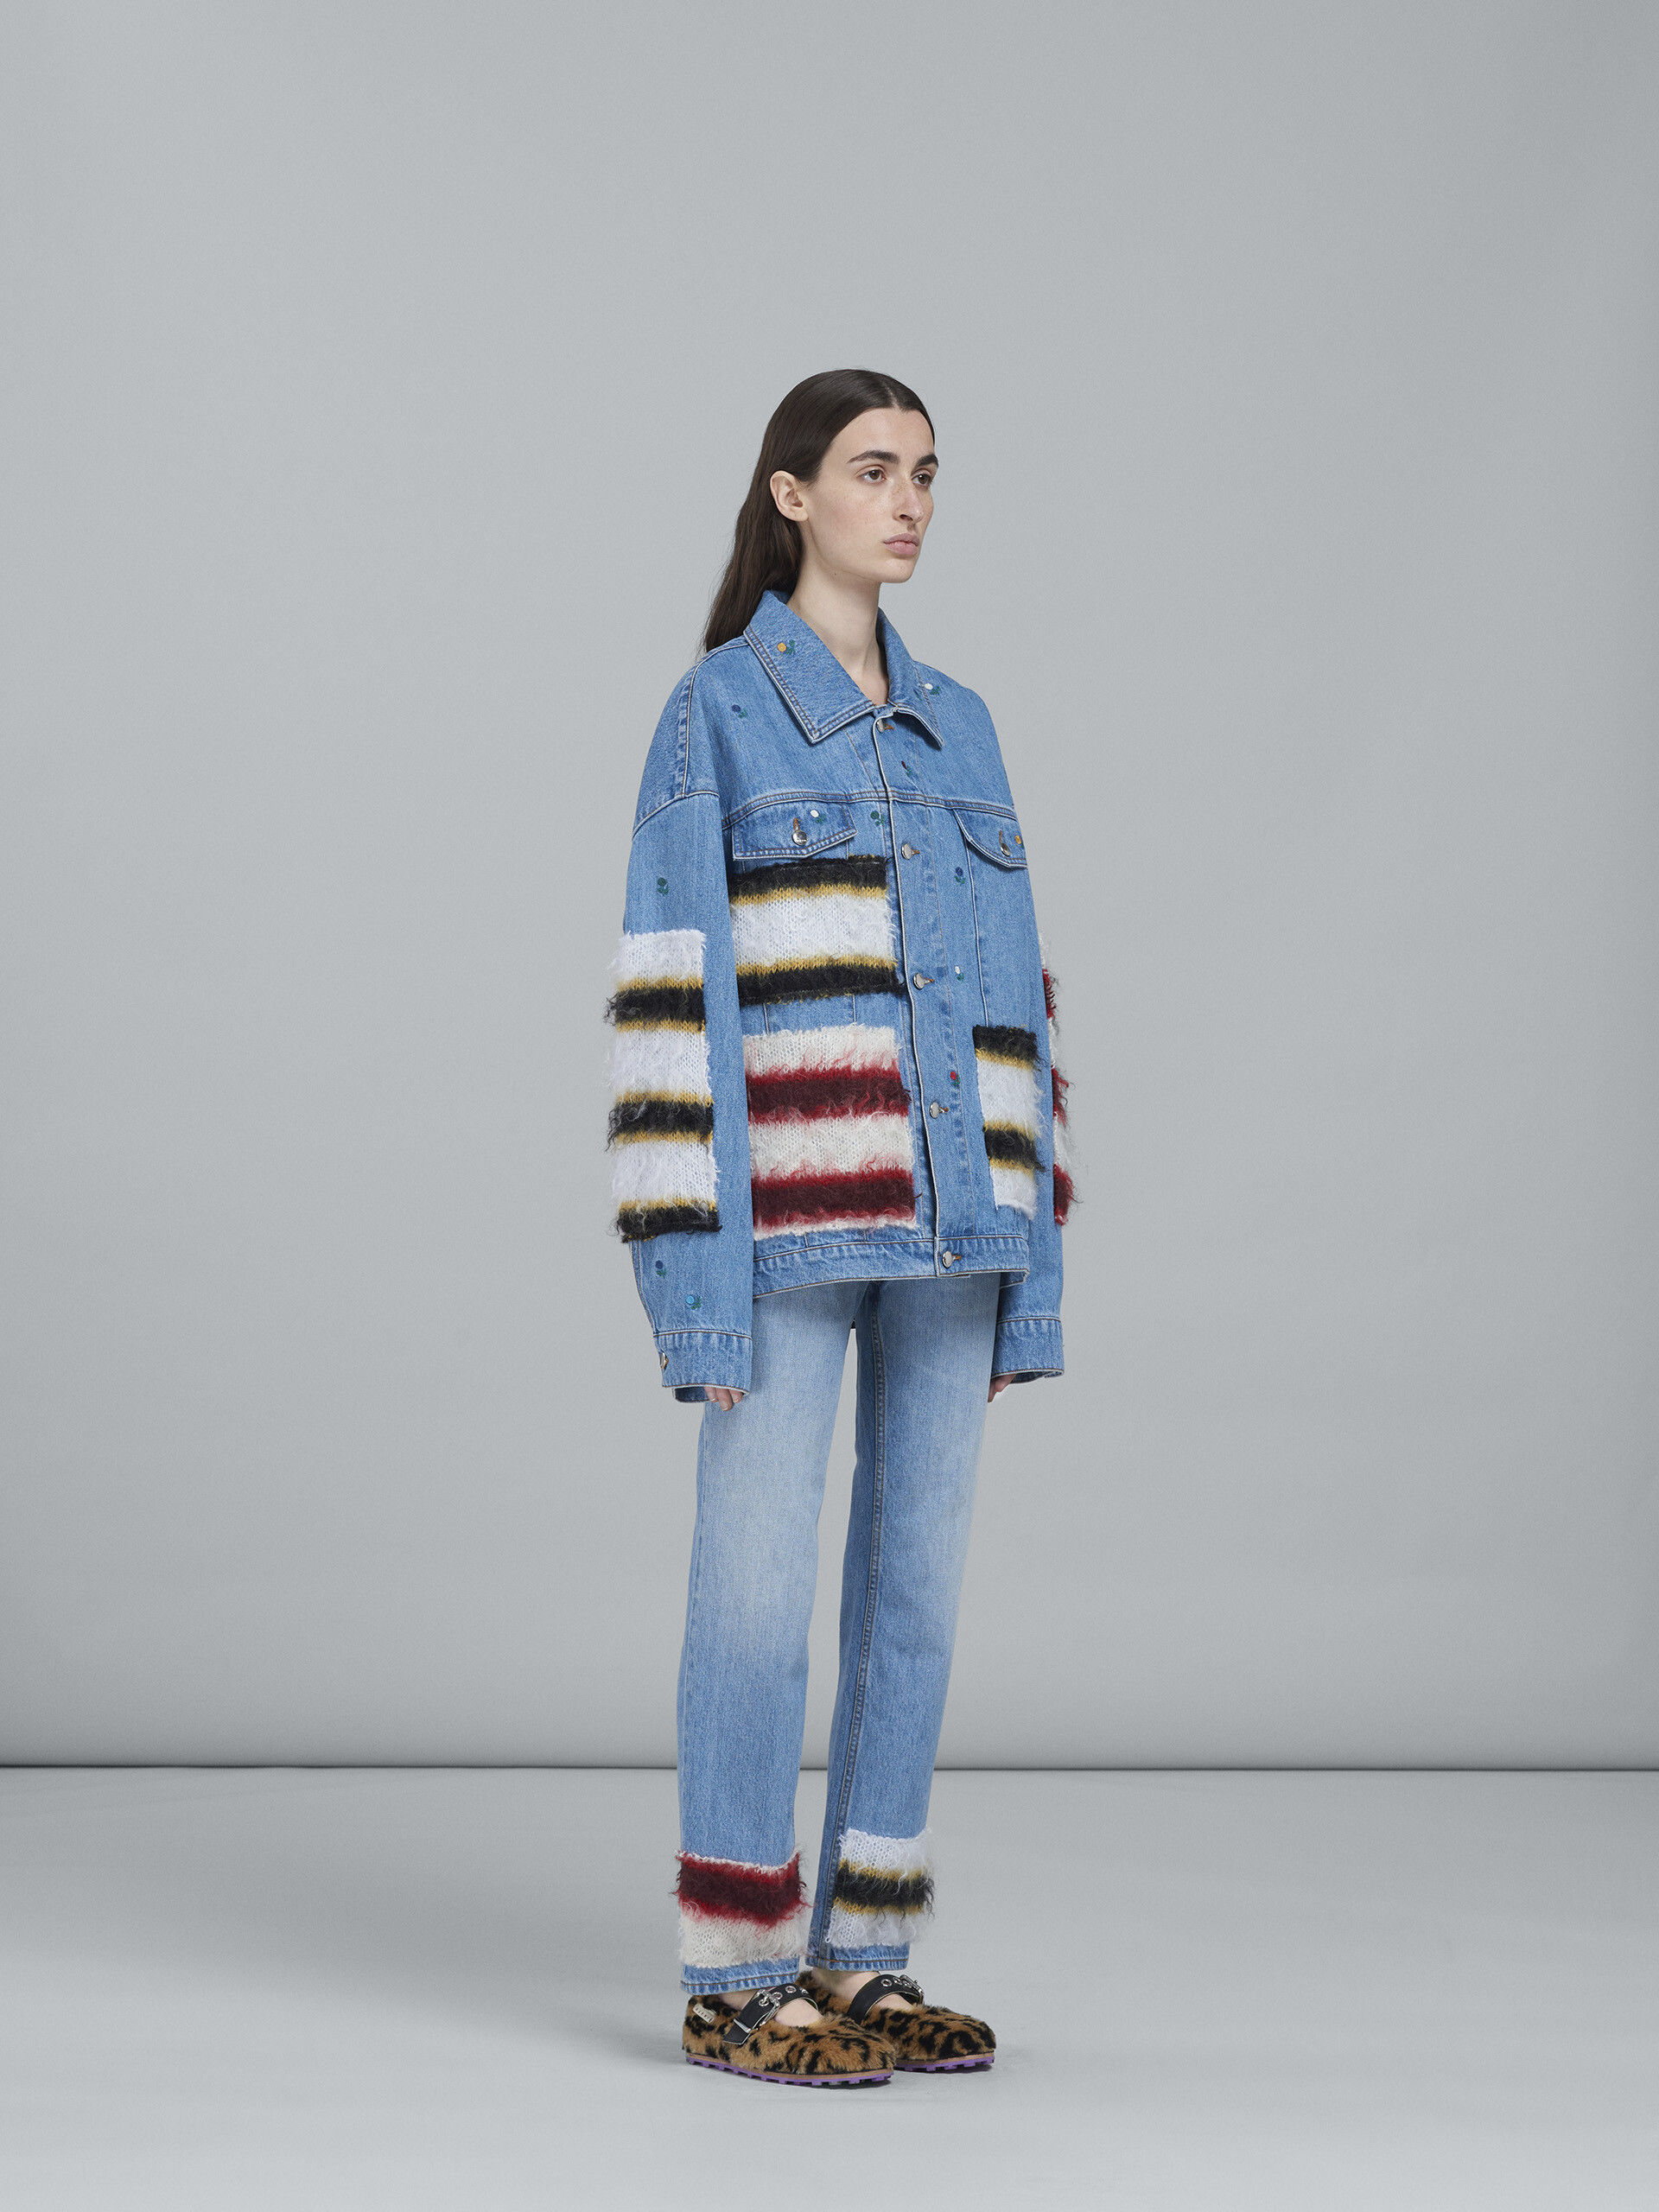 Mohair and denim jacket - Jackets - Image 6